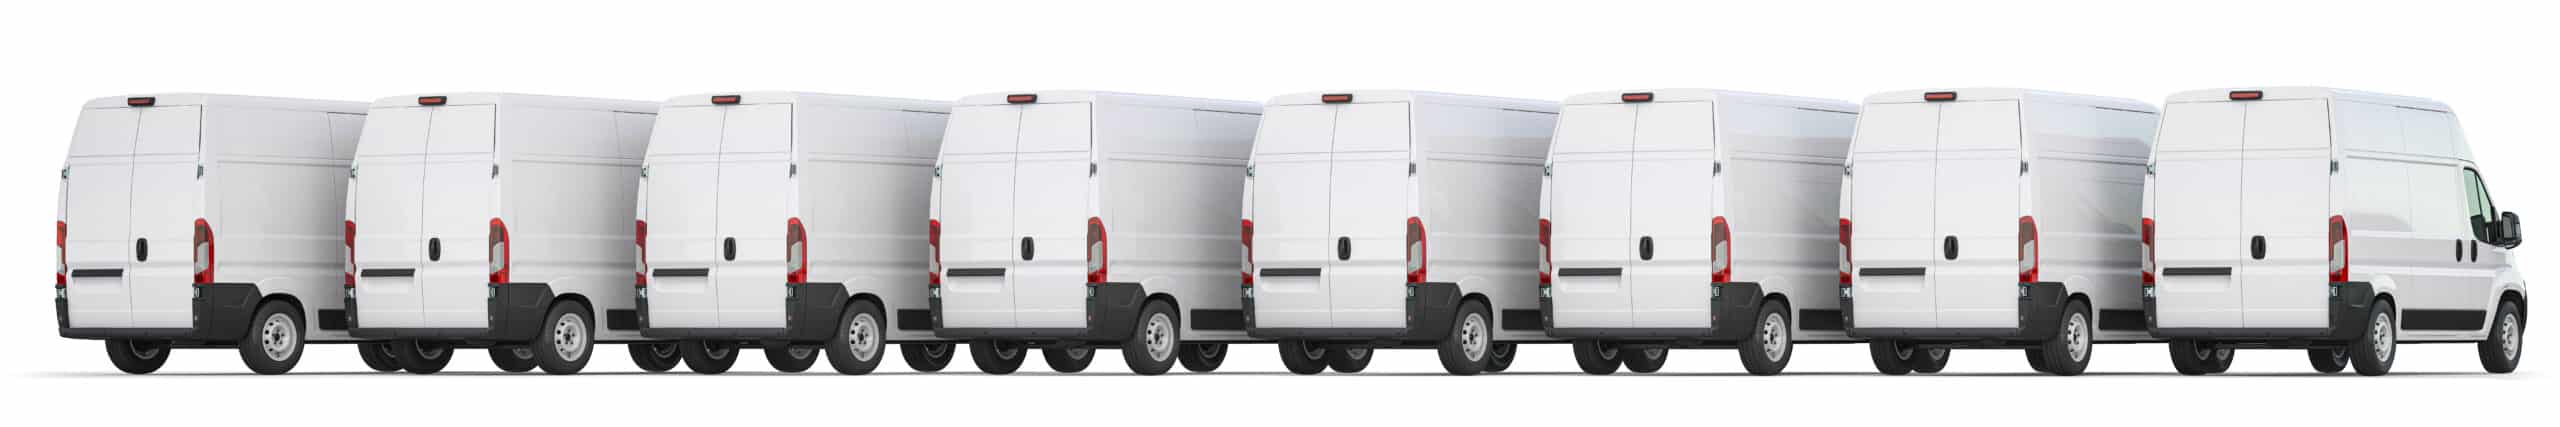 white delivery vans in a row isolated on white bac 2021 08 29 21 04 56 utc scaled